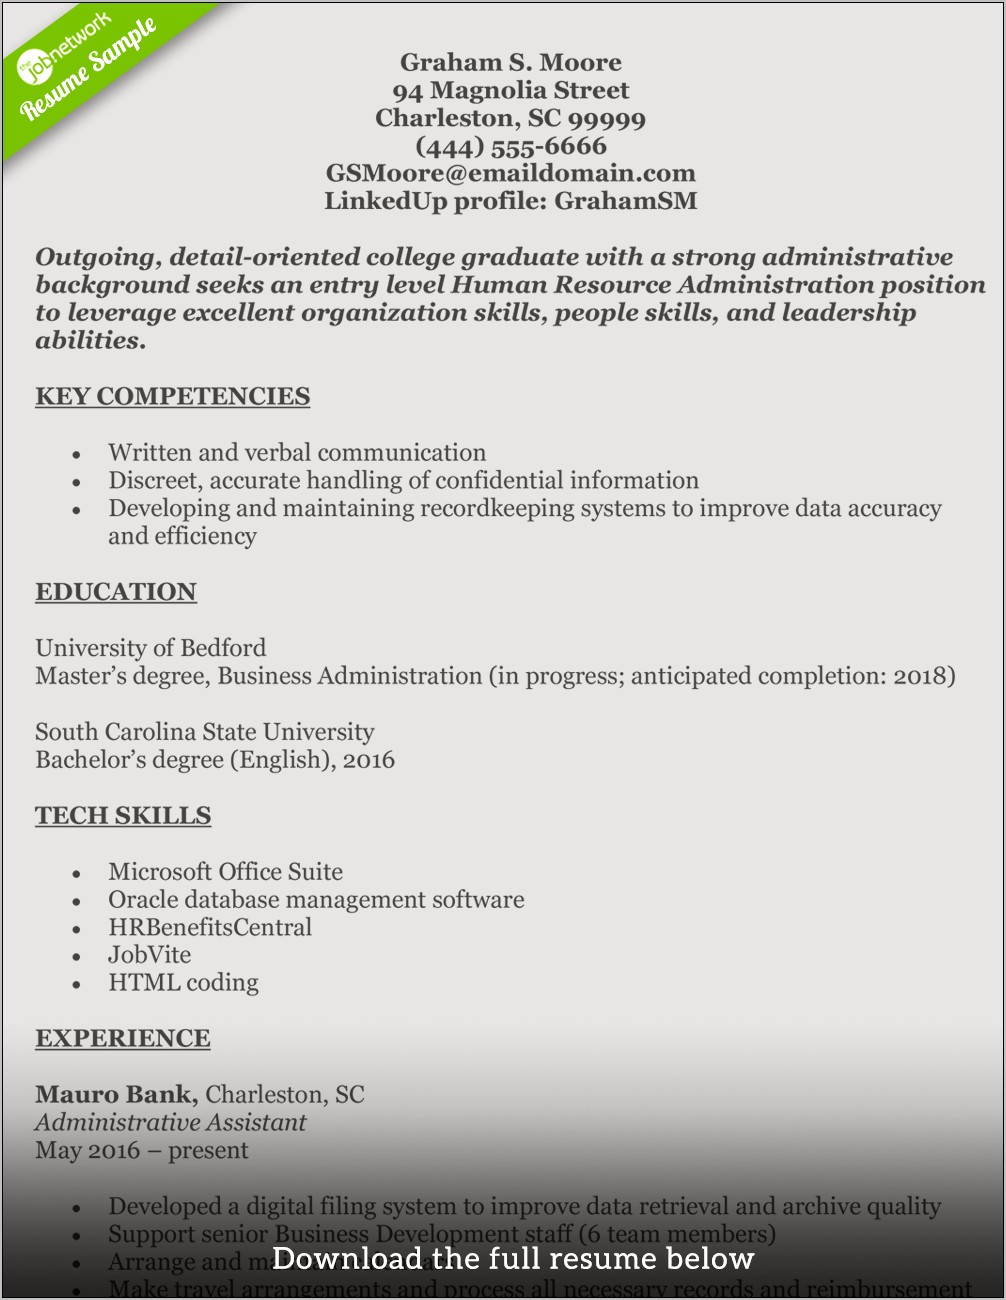 Resume Template With No Higher Education